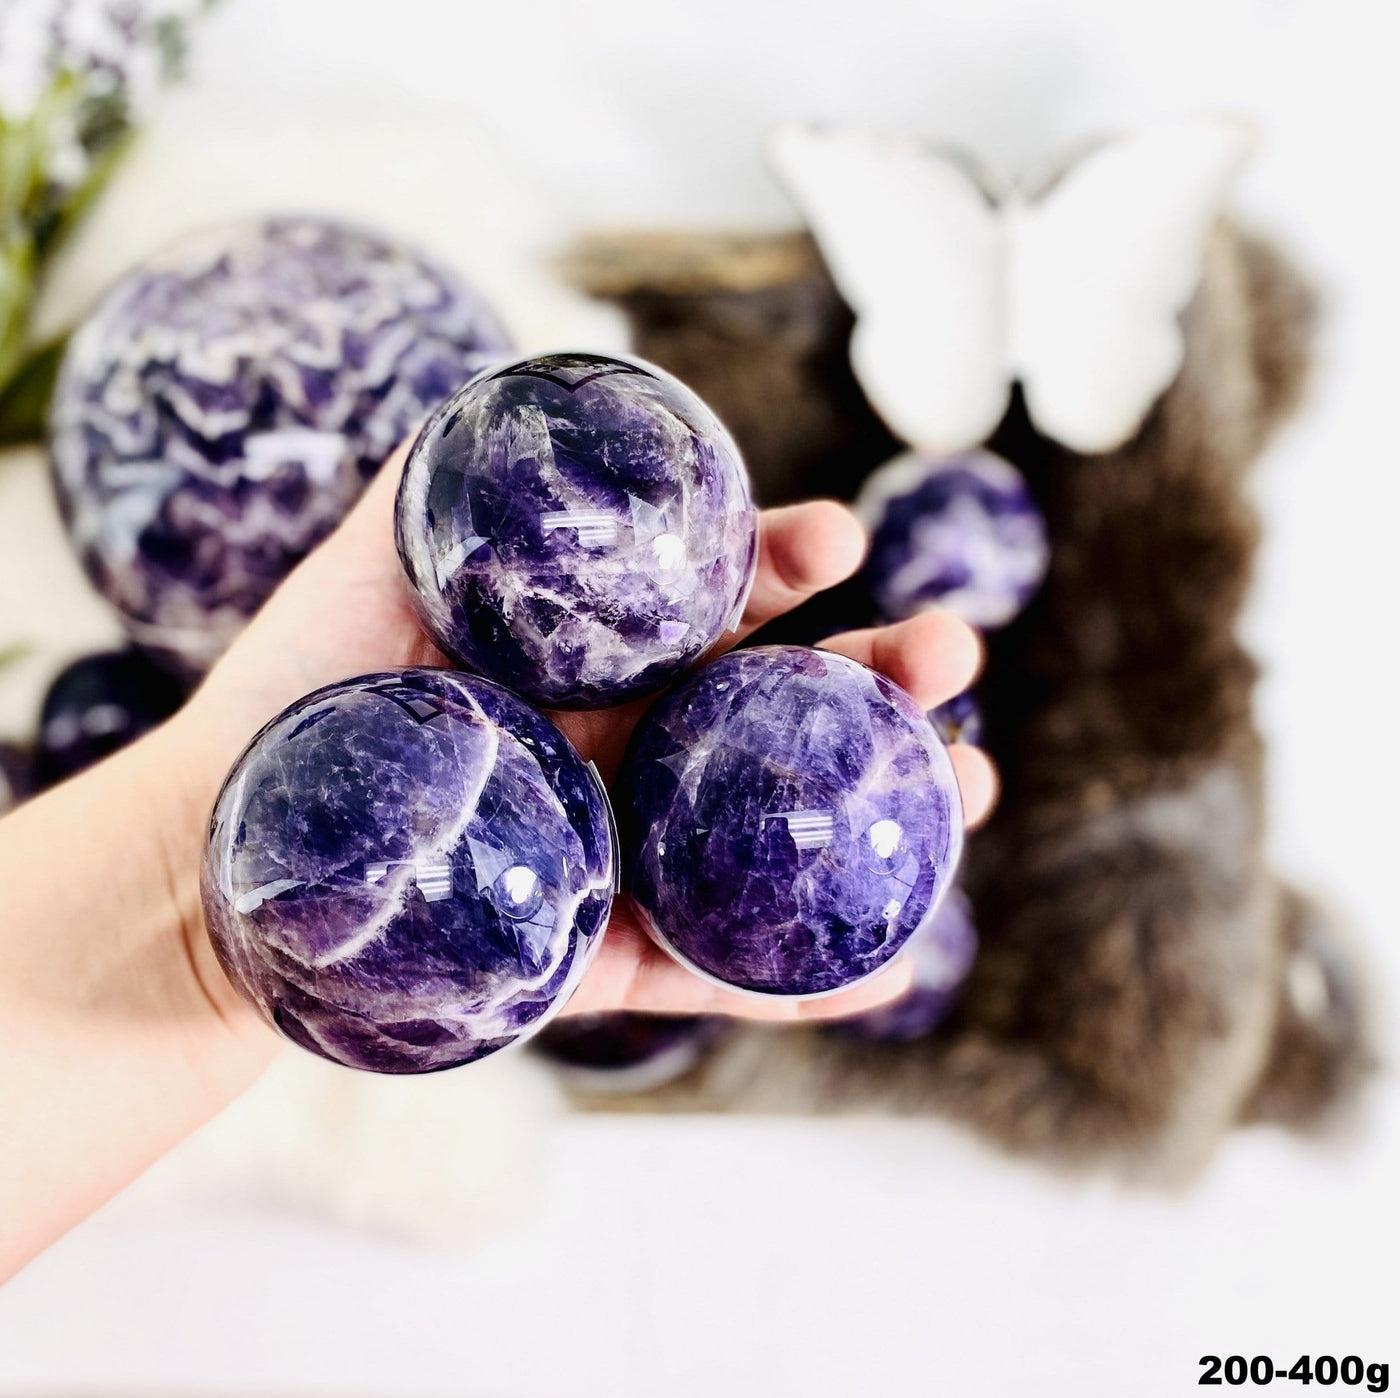 Chevron Amethyst Polished Spheres in a hand, size under 200-400g